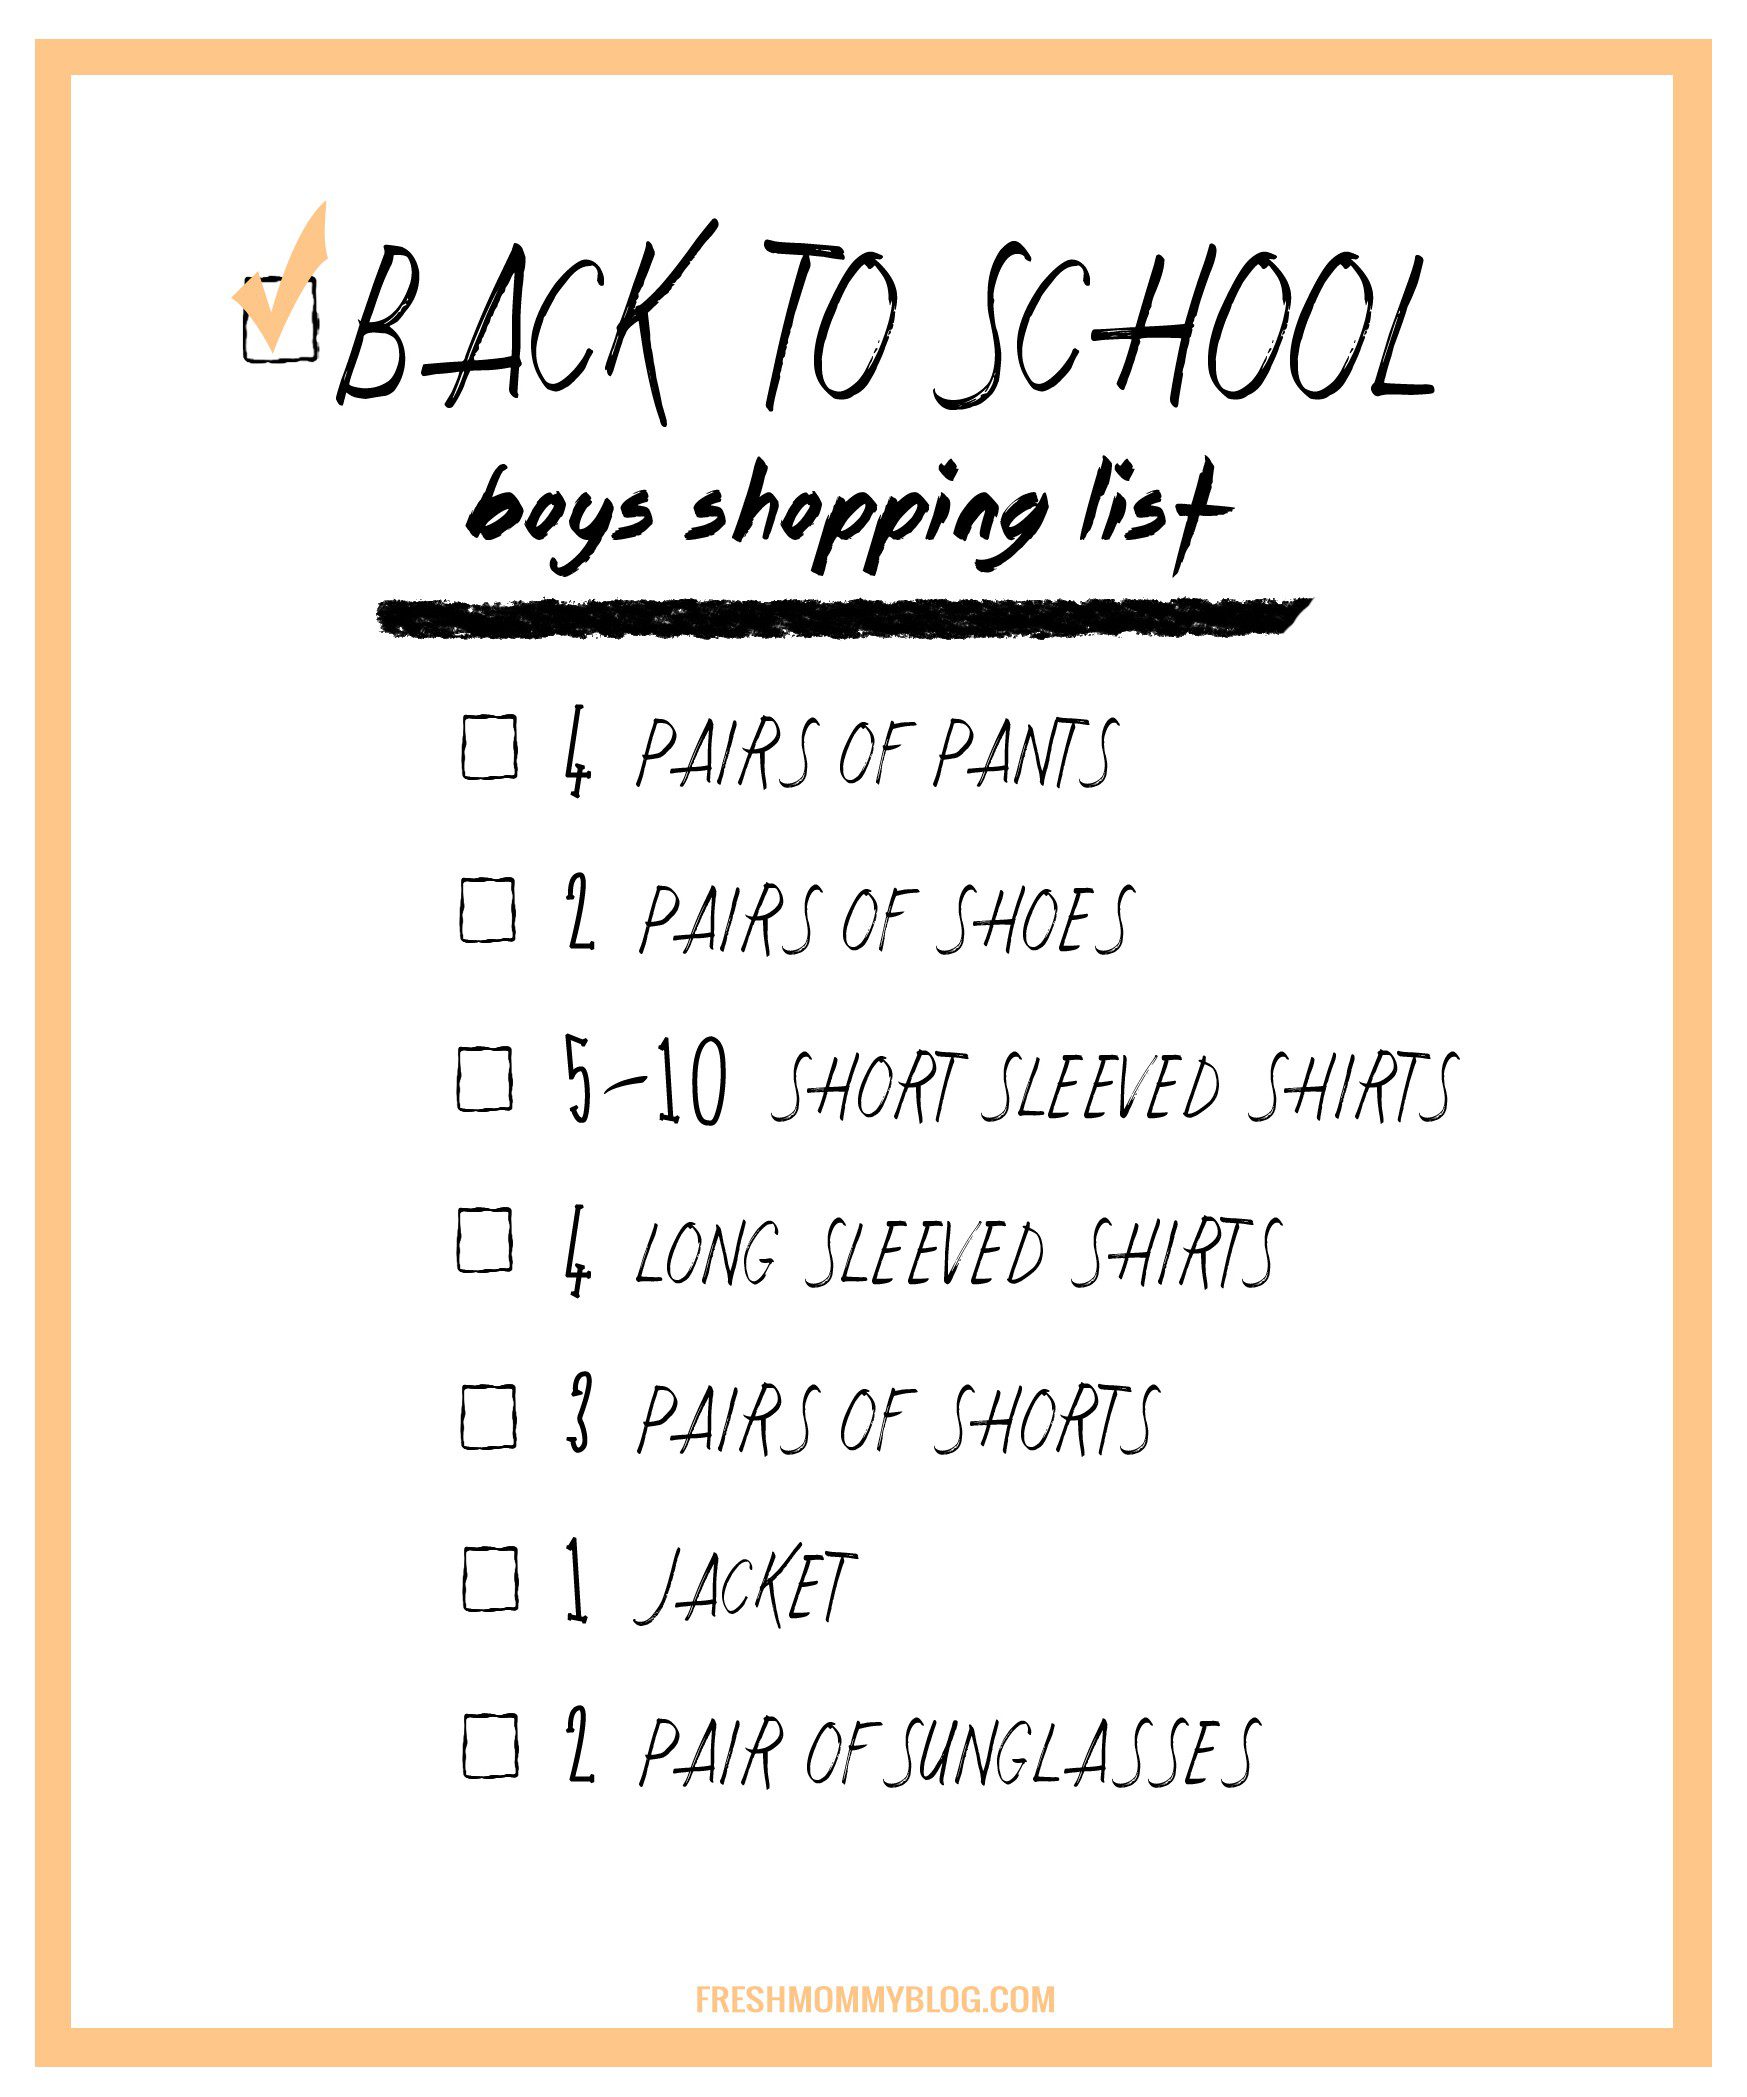 Back to School Shopping Checklist for a killer wardrobe for school. Download the list for boys.